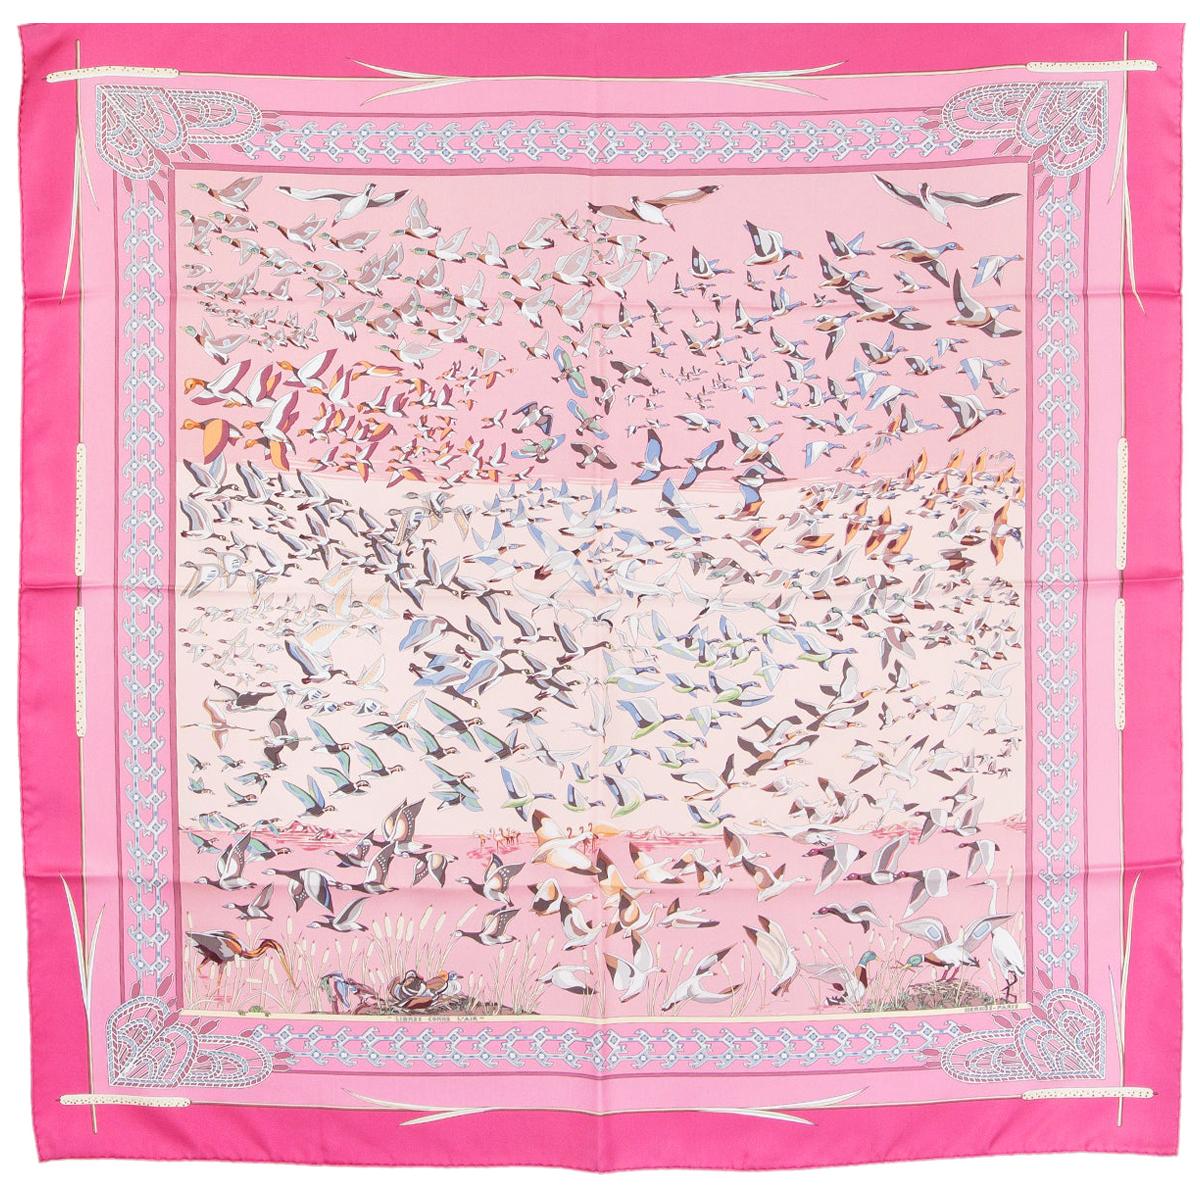 Hermes pink LIBRE COMME L'AIR 90 silk twill Scarf